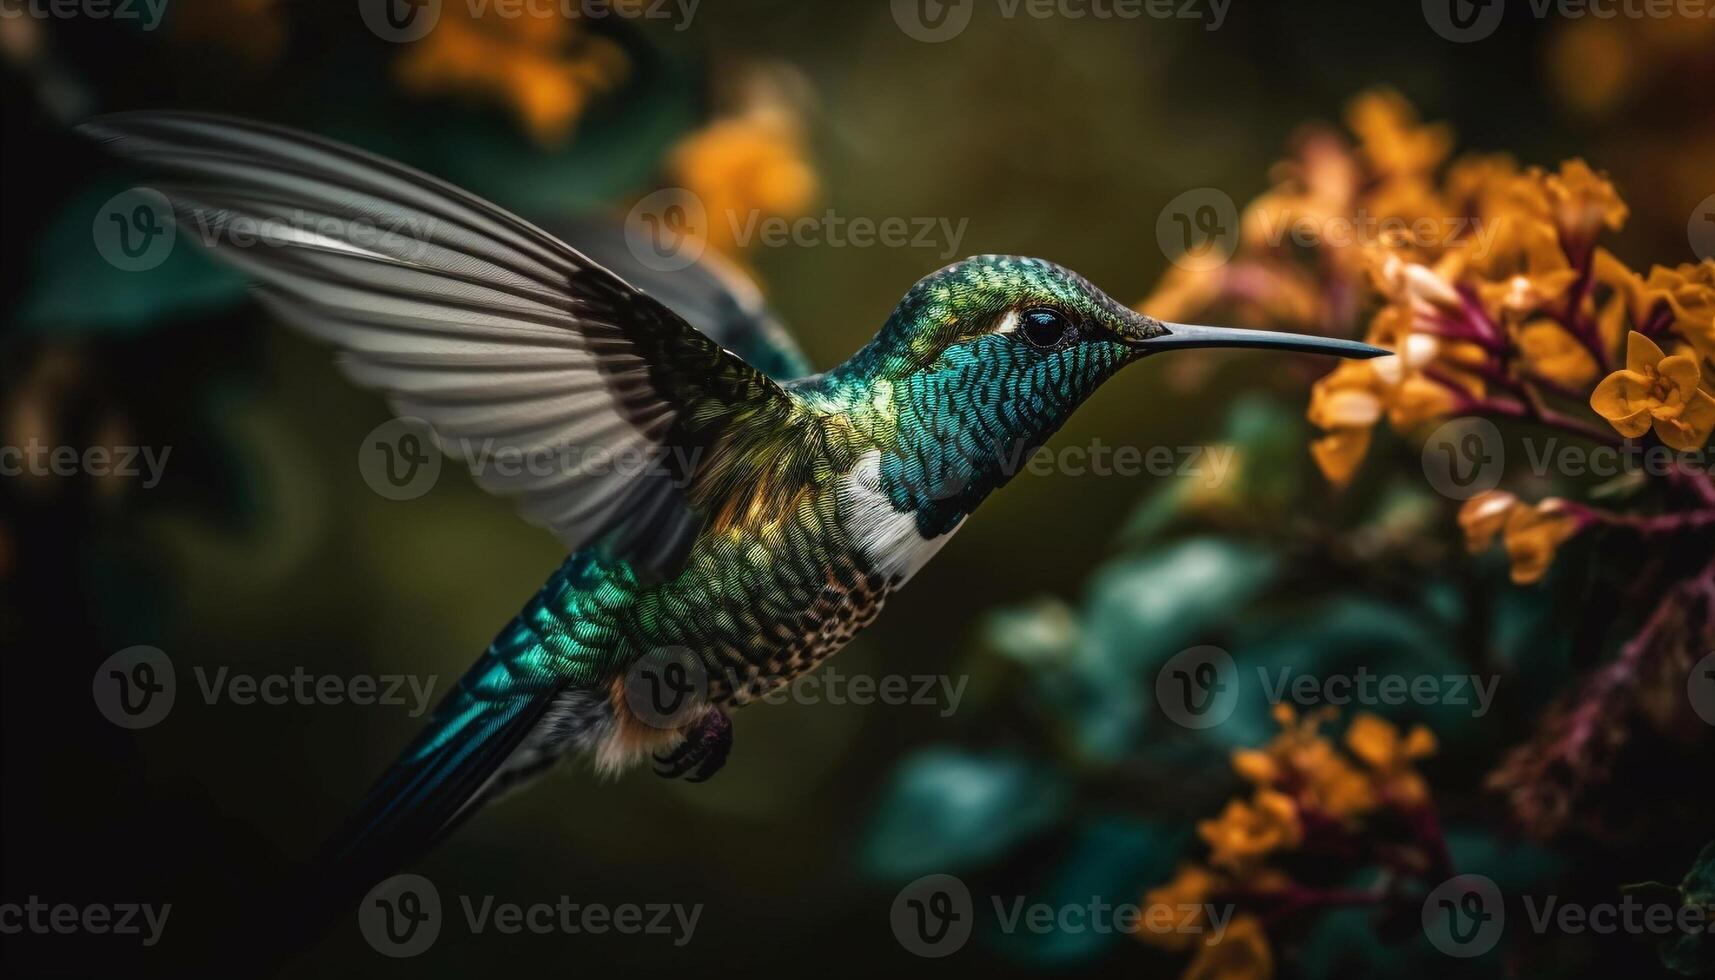 Hummingbird hovering, iridescent feathers, multi colored beak, pollinating vibrant flowers generated by AI photo